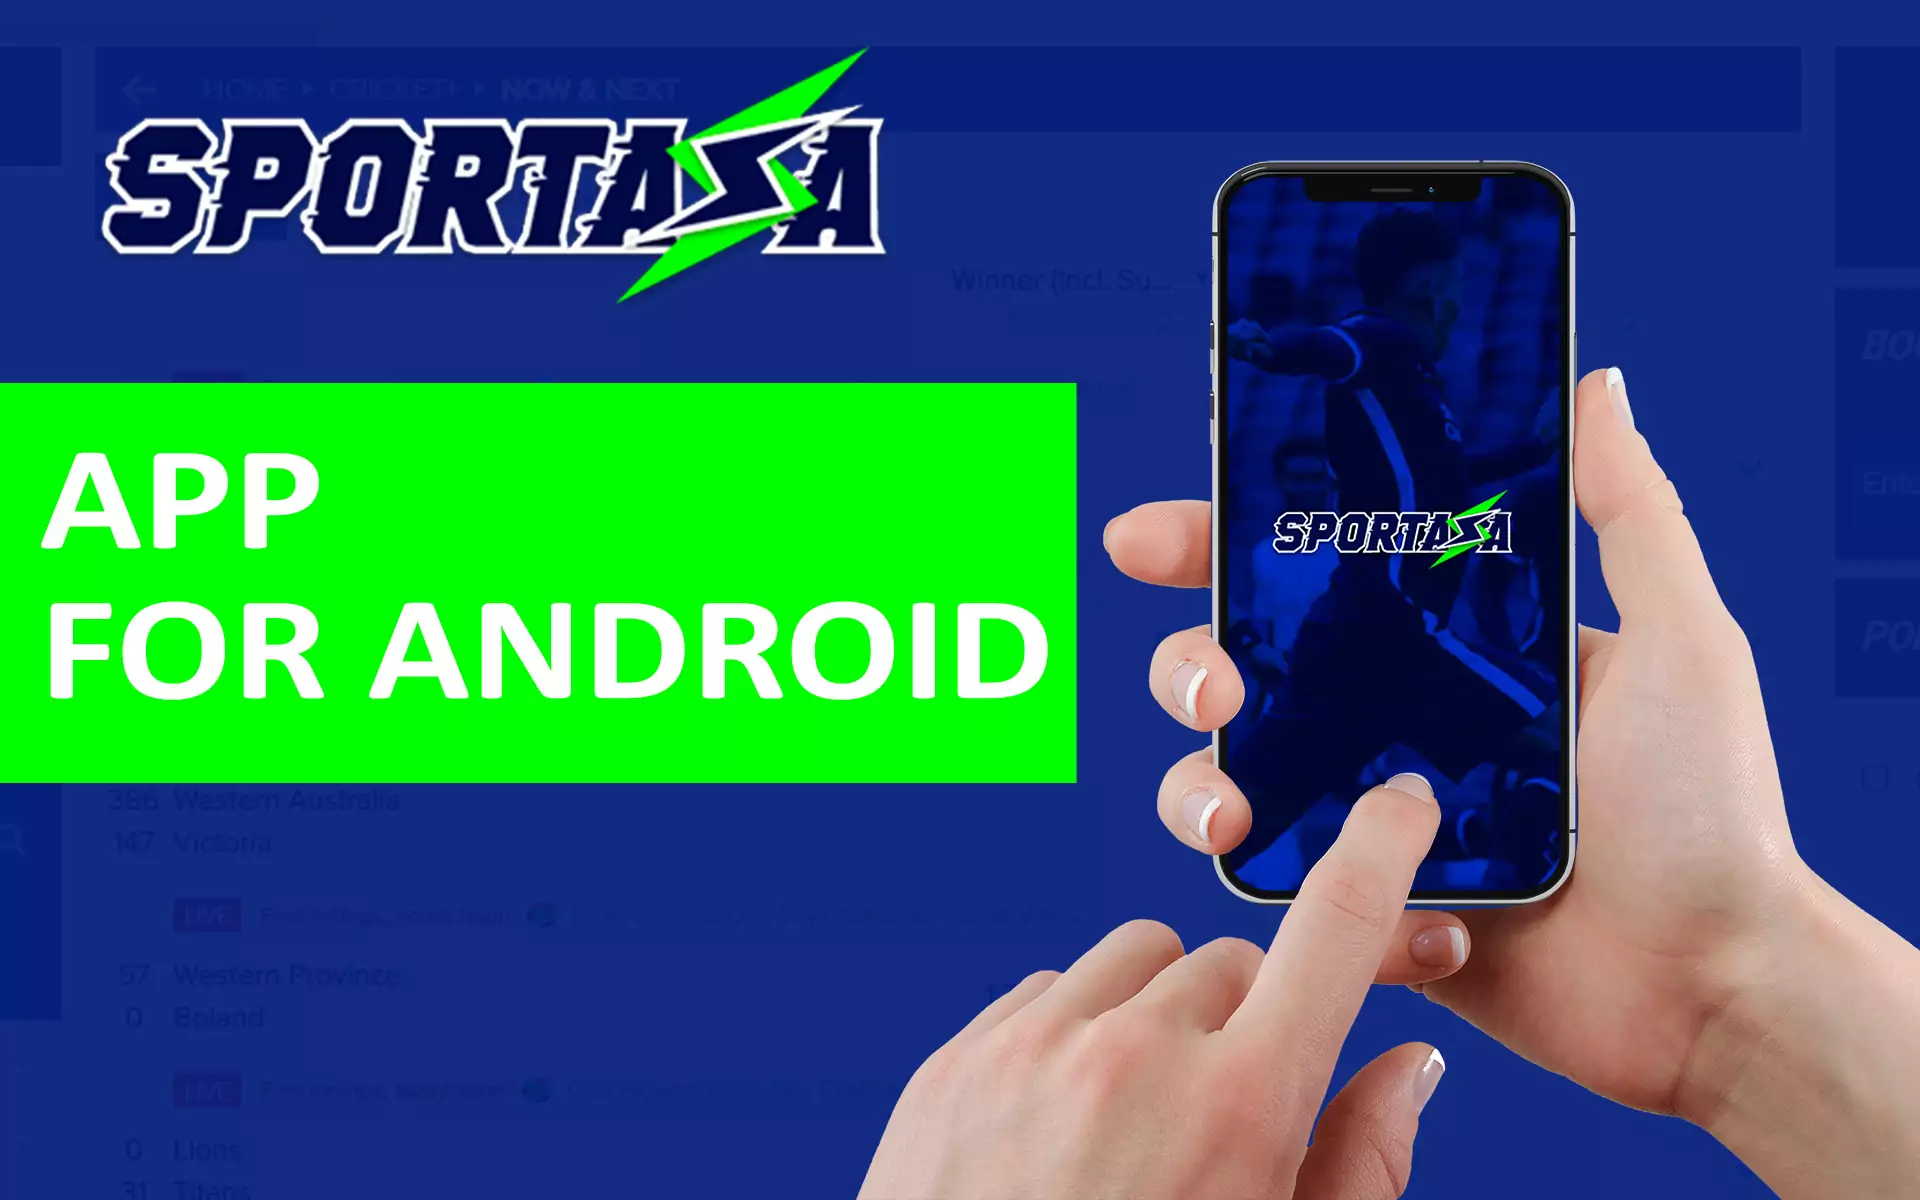 The Sportaza app is currently under development.